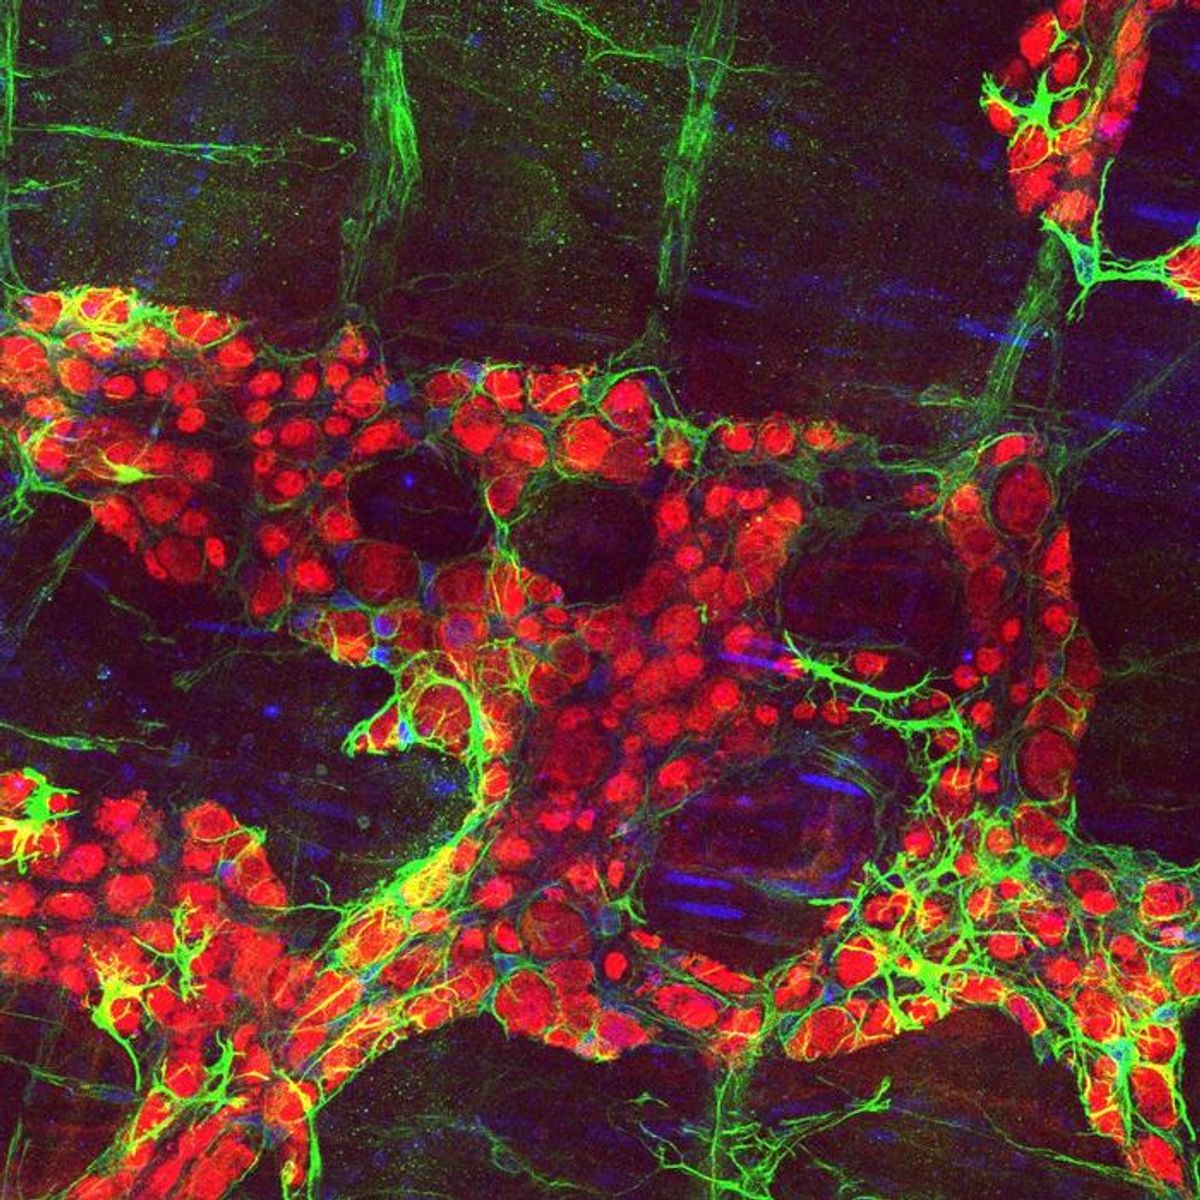 The image shows round-shaped glial cells in red and elongated neuronal cells in green surrounding the glial cells.